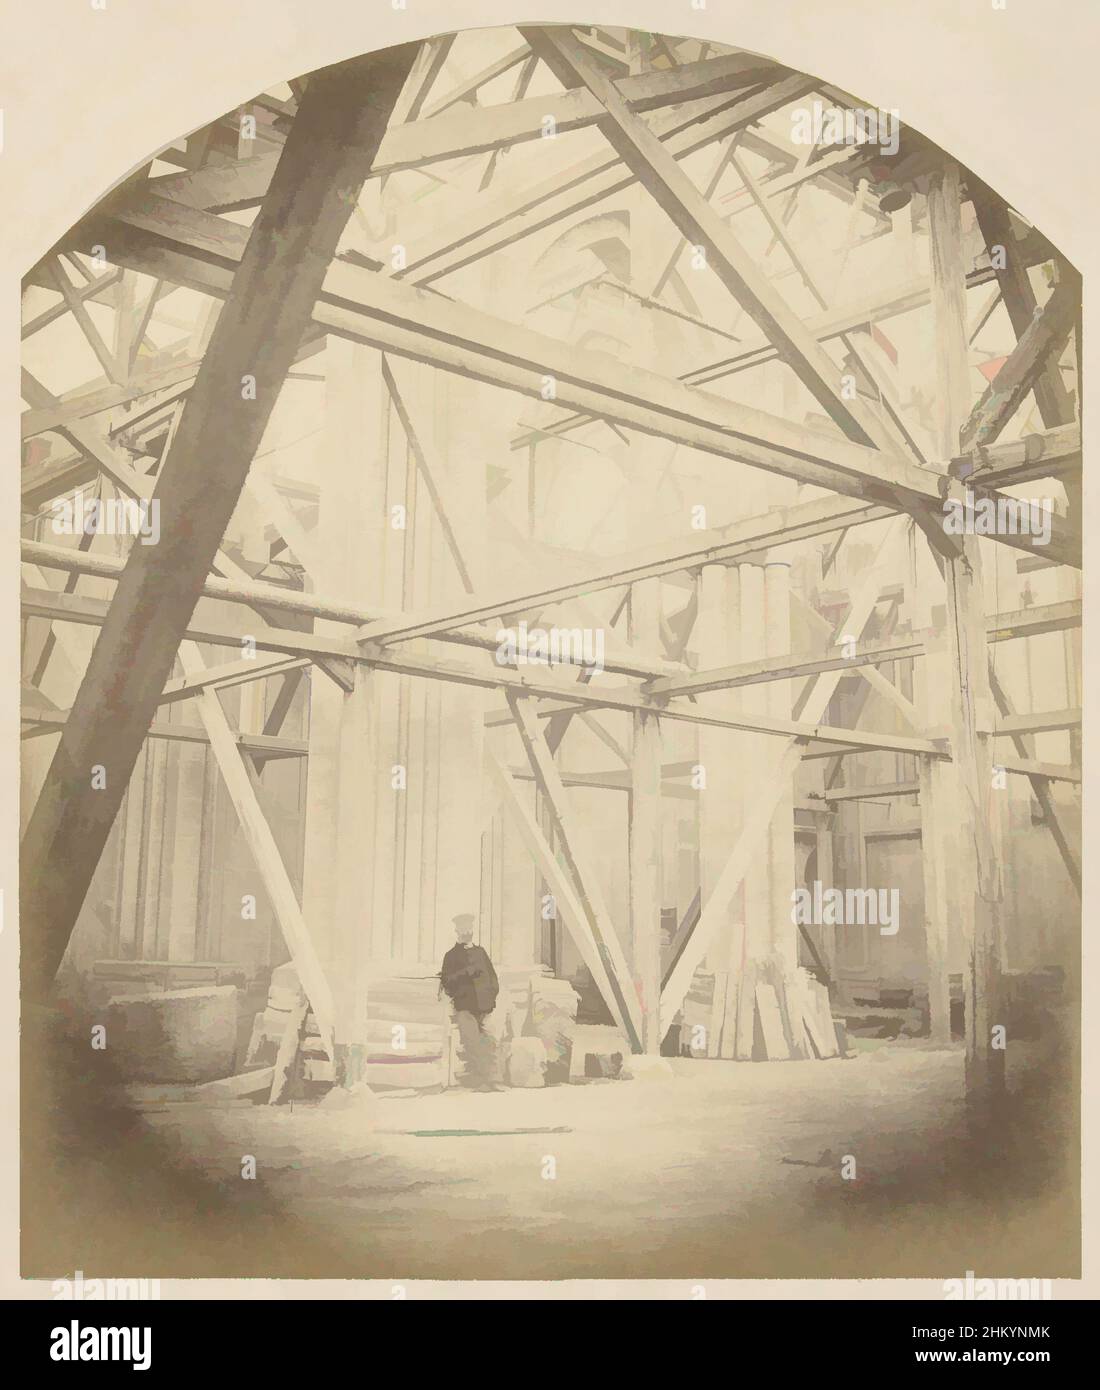 Art inspired by Saint Vincent de Paul Church in Marseille under construction, Adolphe Terris (attributed to), Fred Vitigliano (attributed to), Marseille, 1855 - 1860, paper, cardboard, albumen print, height 193 mm × width 164 mmheight 372 mm × width 294 mm, Classic works modernized by Artotop with a splash of modernity. Shapes, color and value, eye-catching visual impact on art. Emotions through freedom of artworks in a contemporary way. A timeless message pursuing a wildly creative new direction. Artists turning to the digital medium and creating the Artotop NFT Stock Photo